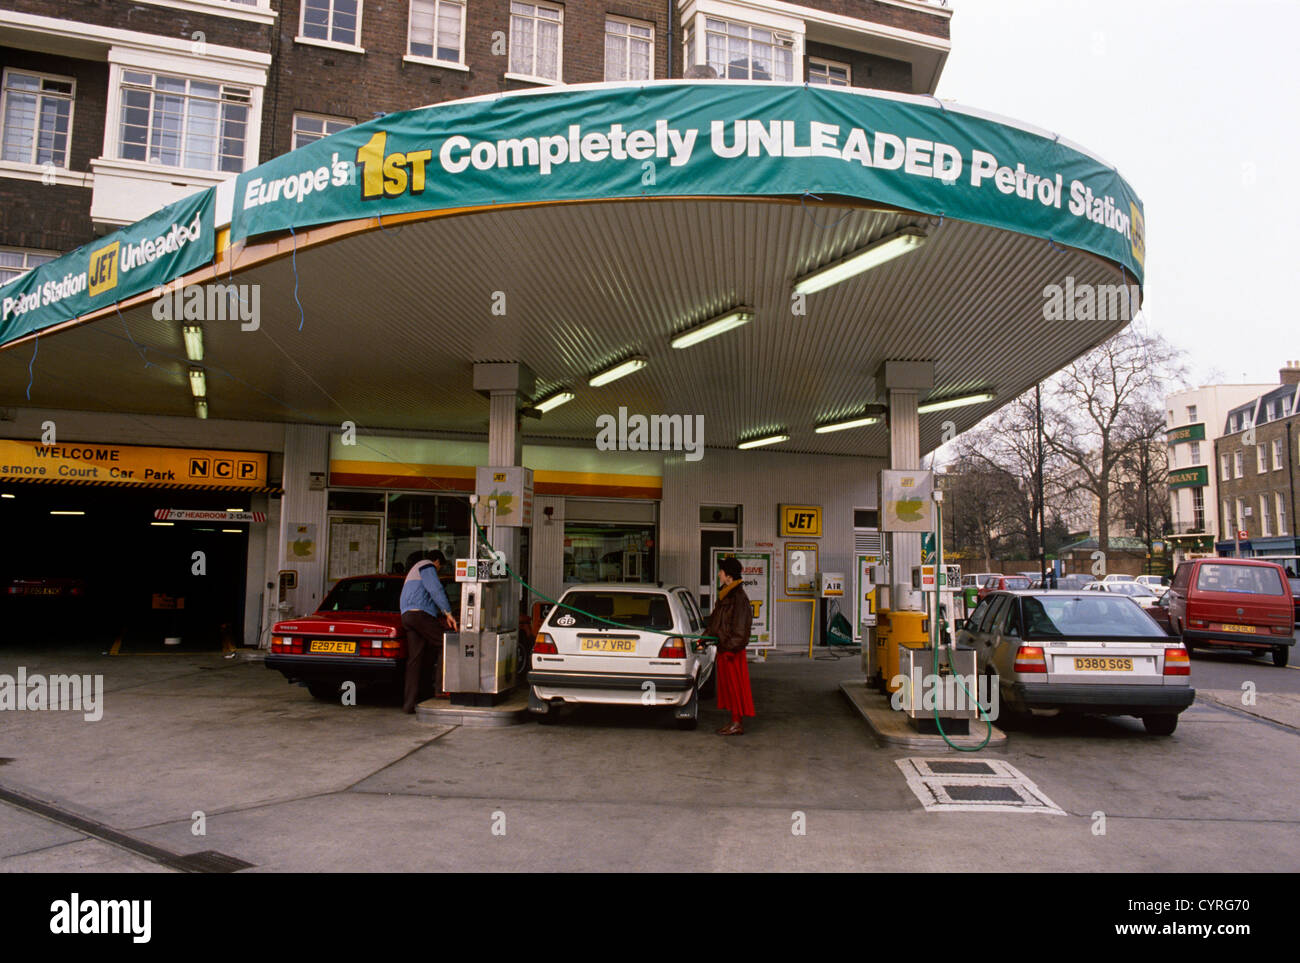 An exterior of Europe's very first completely Unleaded petrol station, seen in 1989 on Park Road, NW8 London. Stock Photo